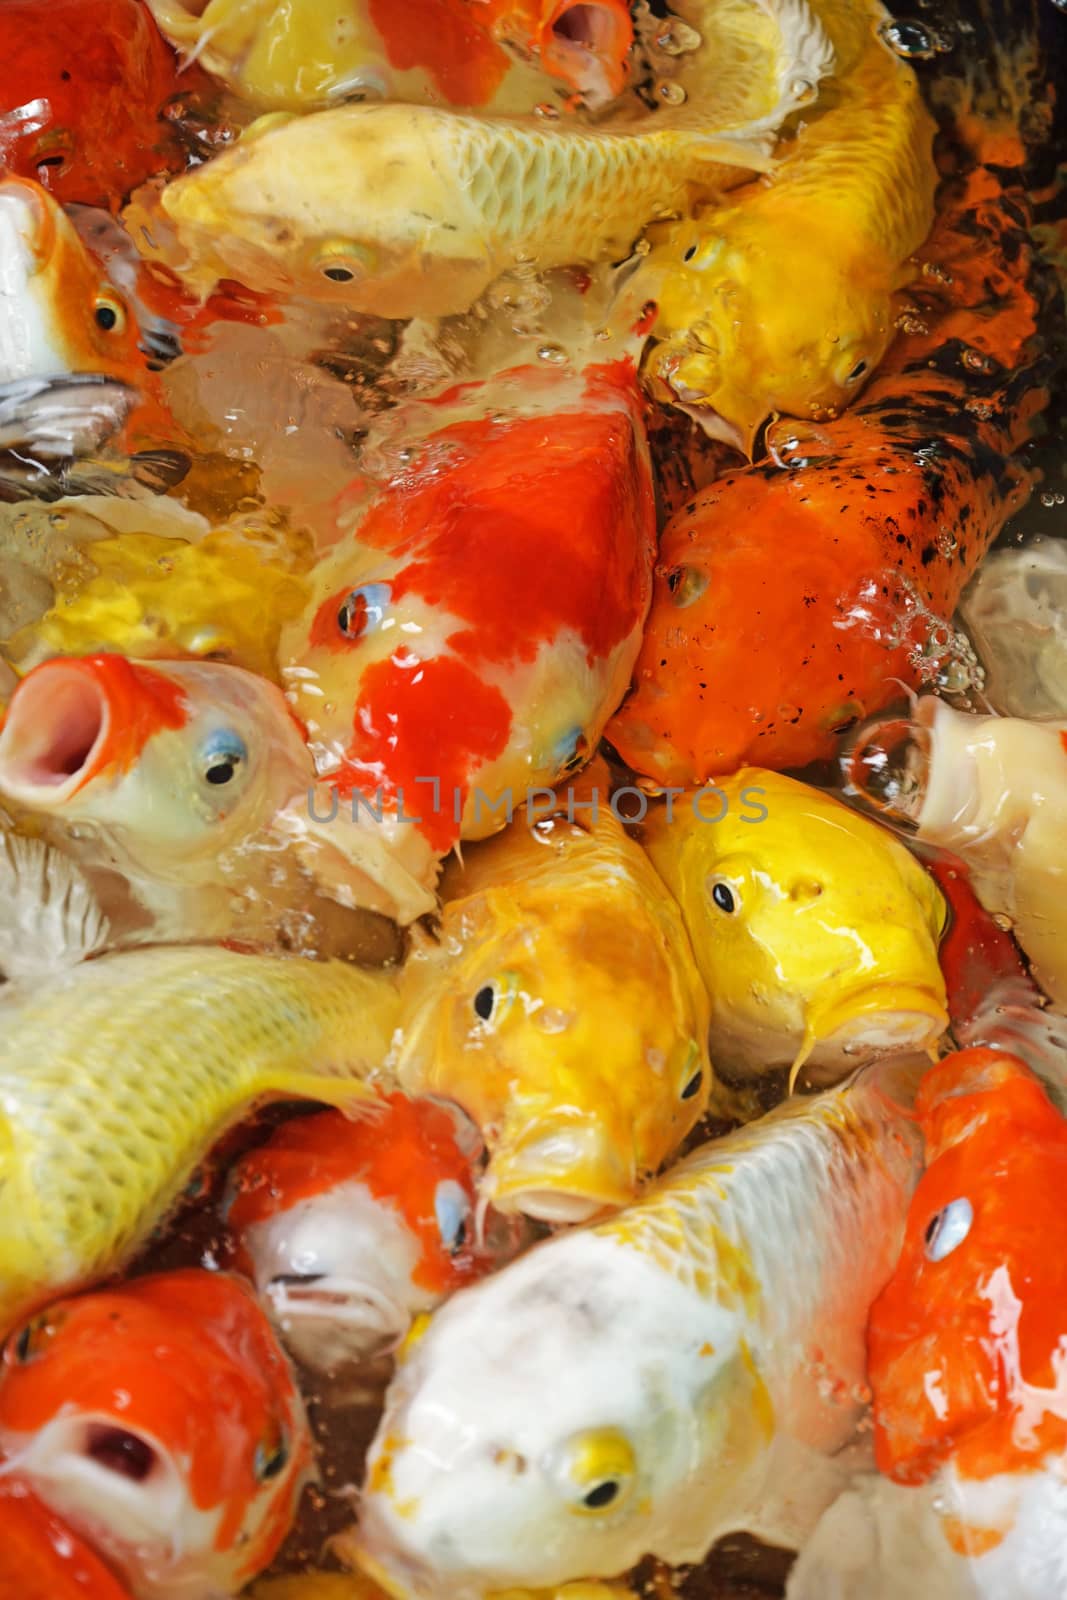 Koi fish feeding in the pond by think4photop